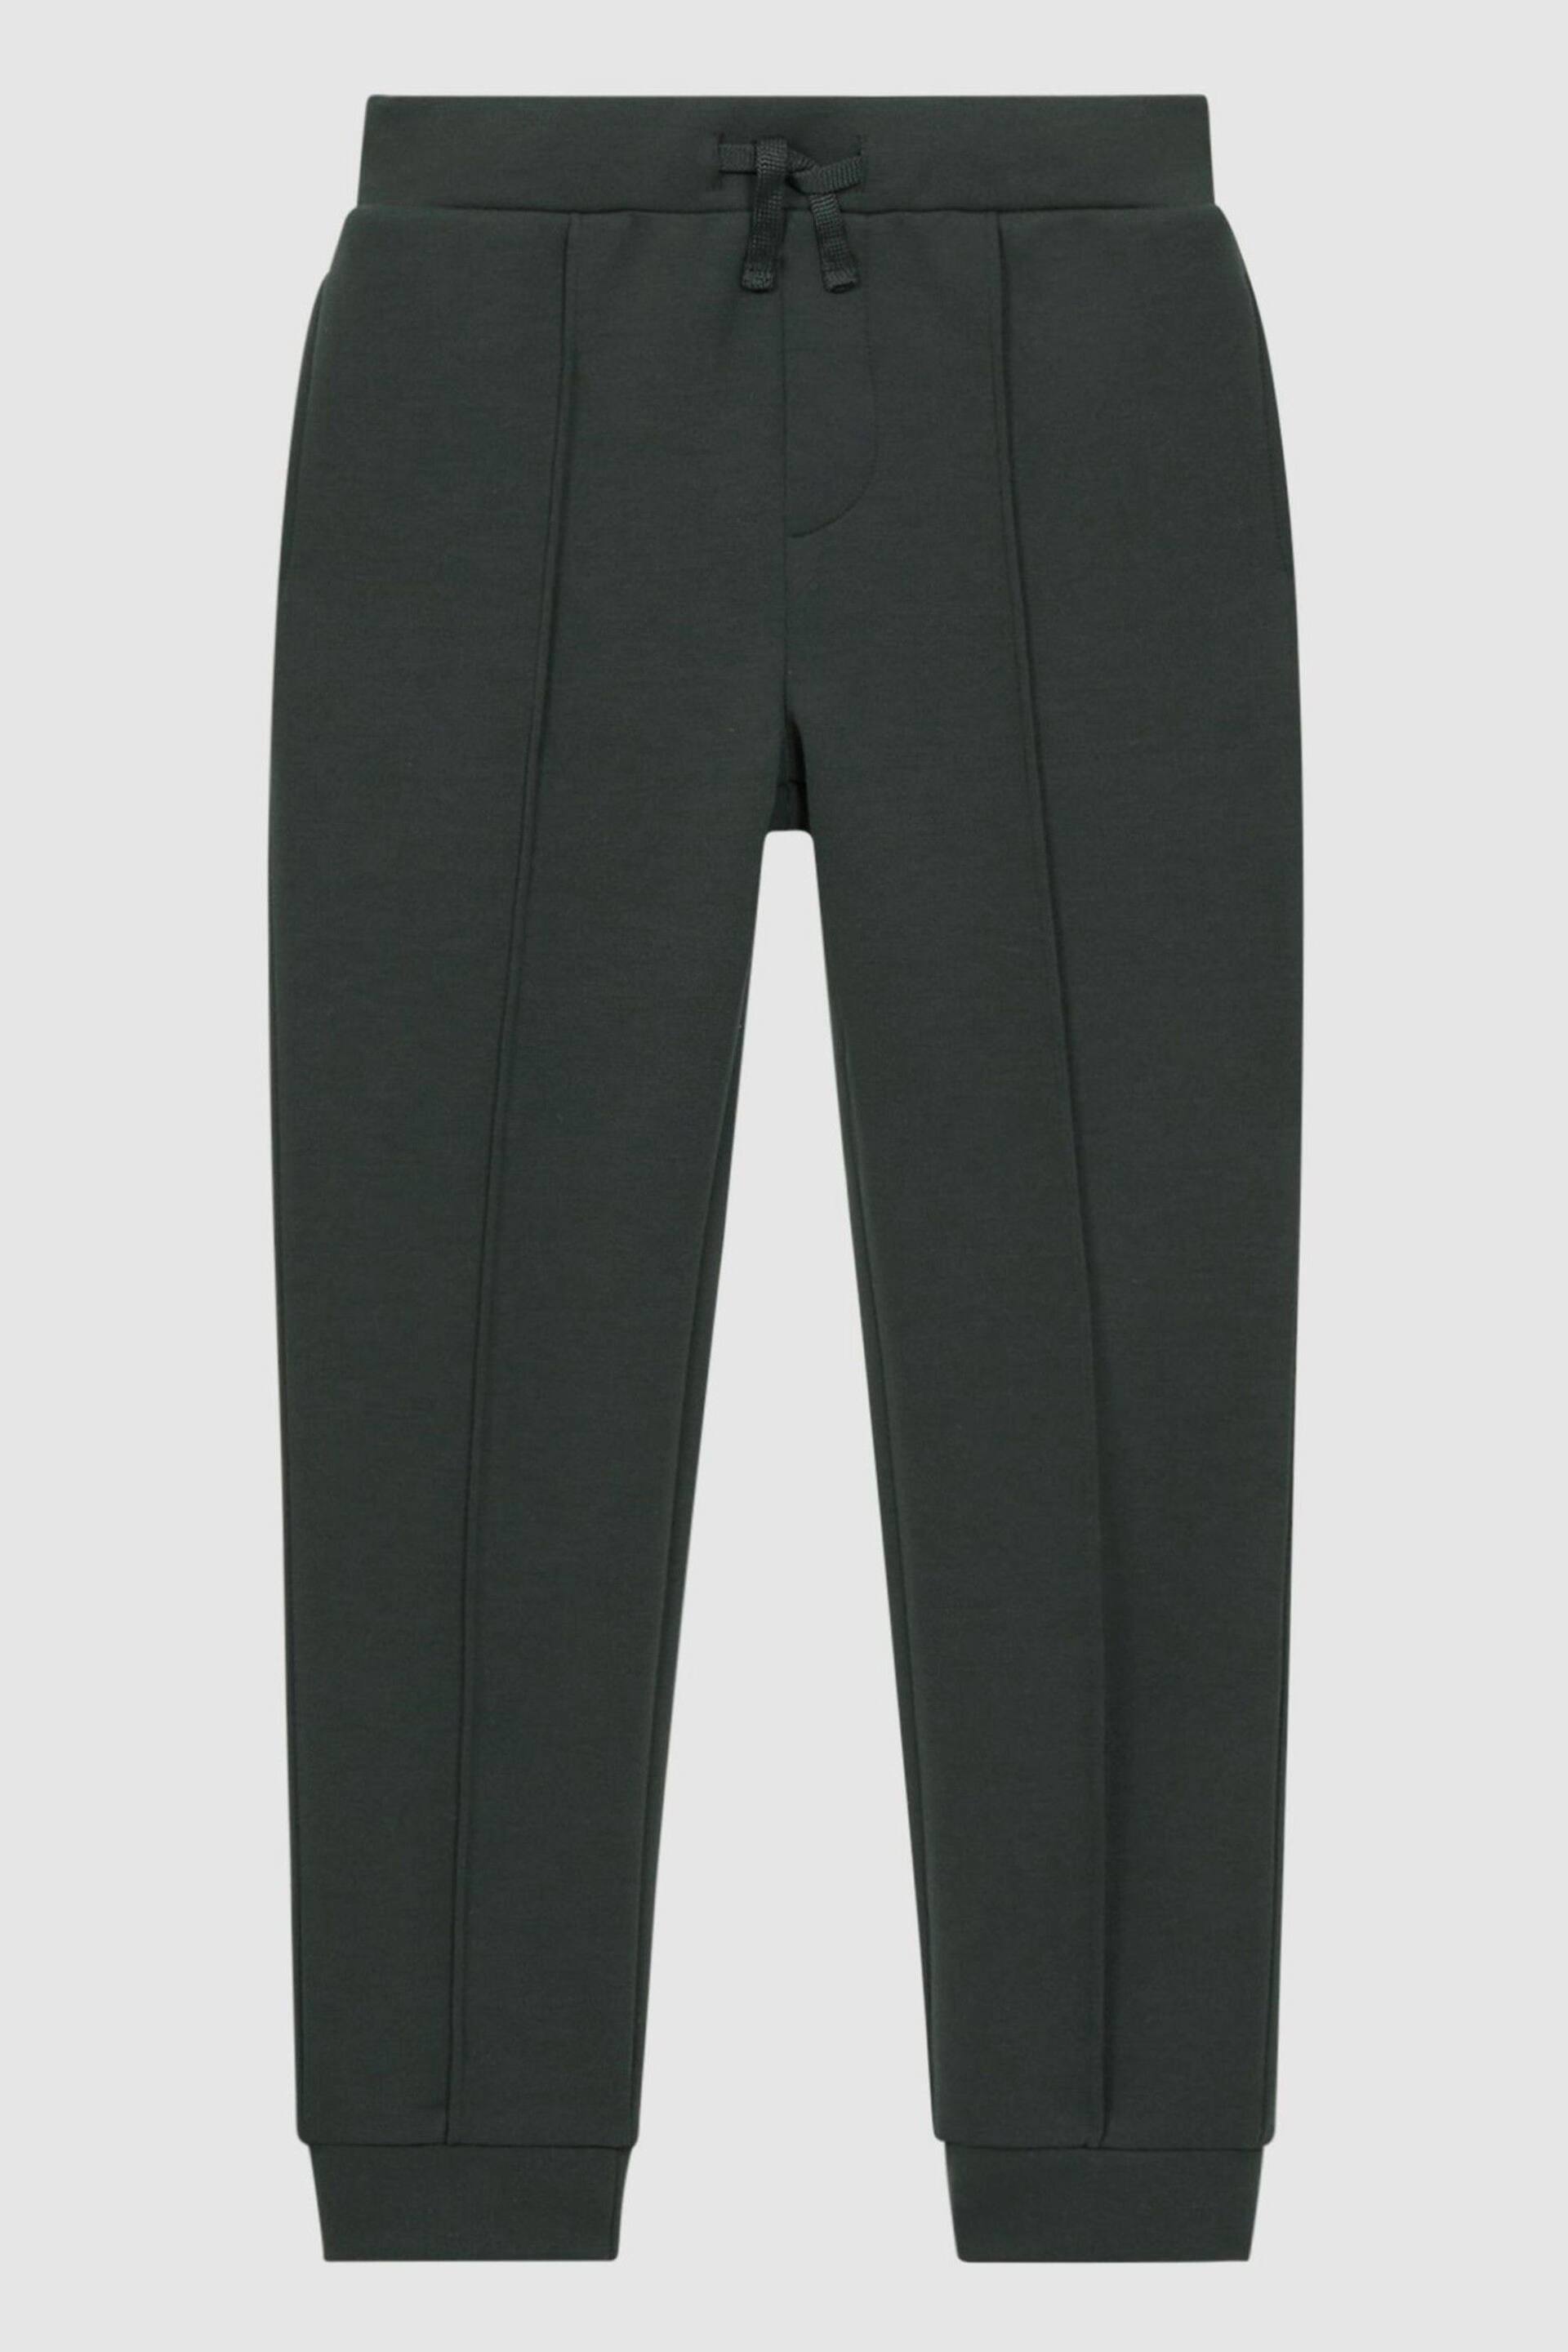 Reiss Forest Green Premier Senior Drawstring Jersey Joggers - Image 2 of 5